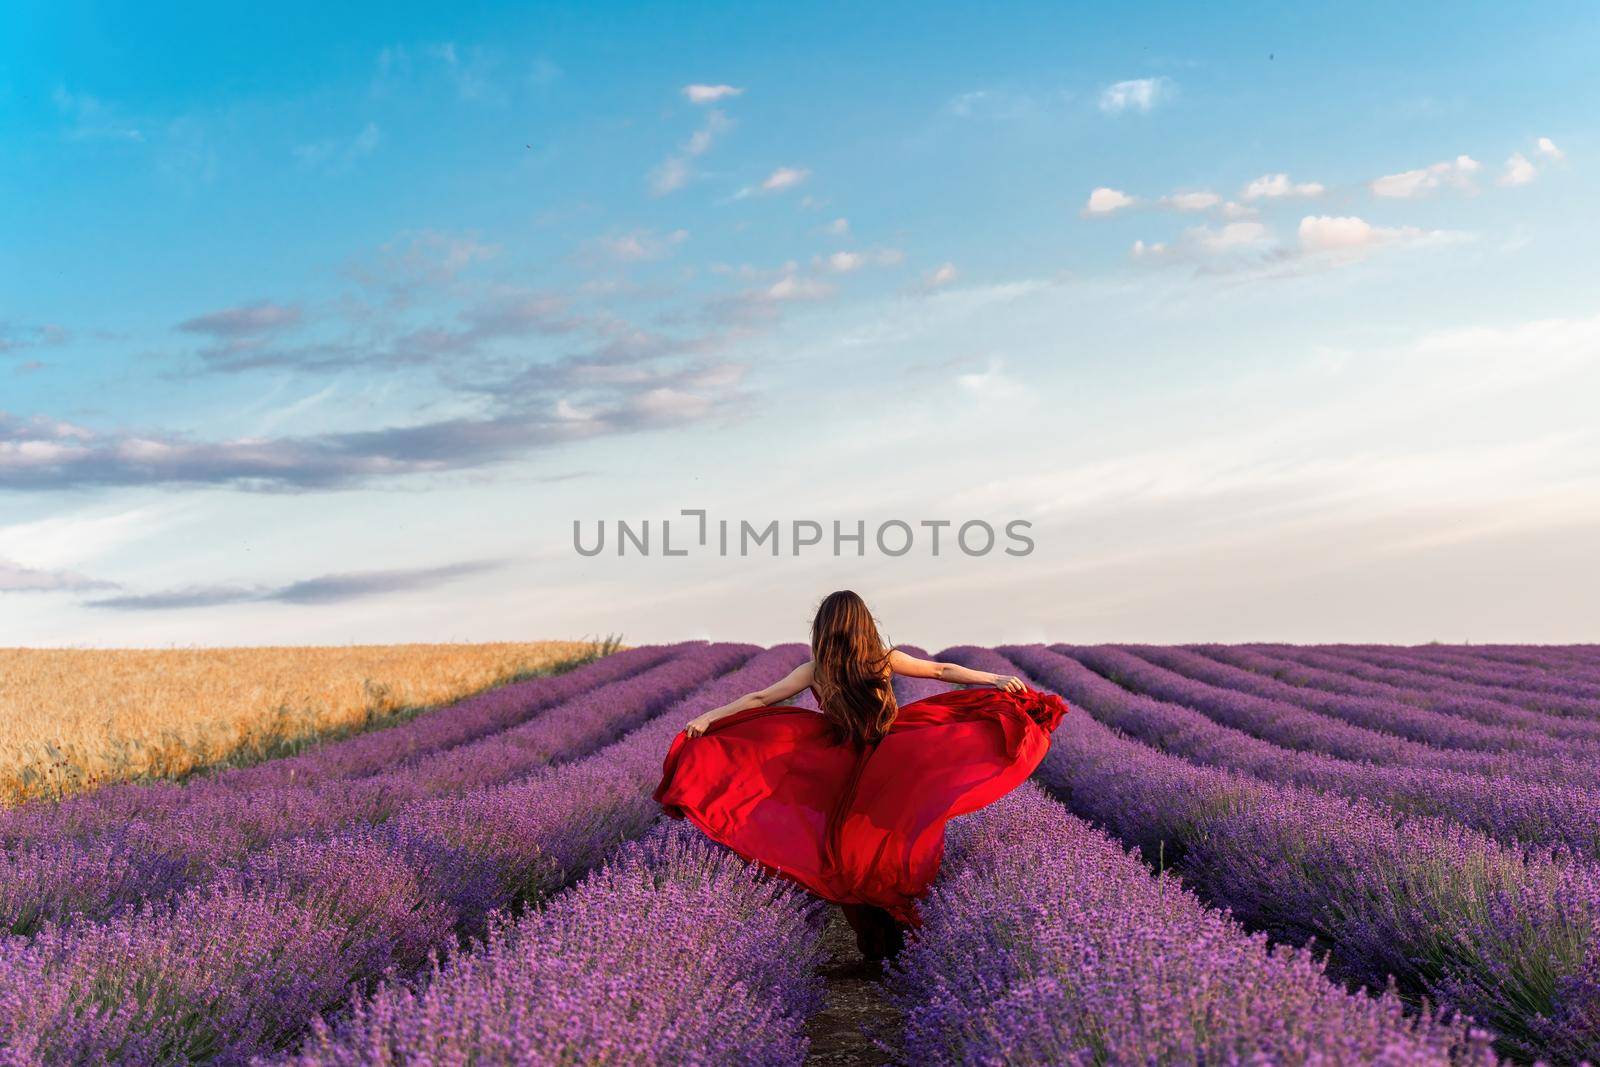 Among the lavender fields. A beautiful girl in a red dress runs against the background of a large lavender field.